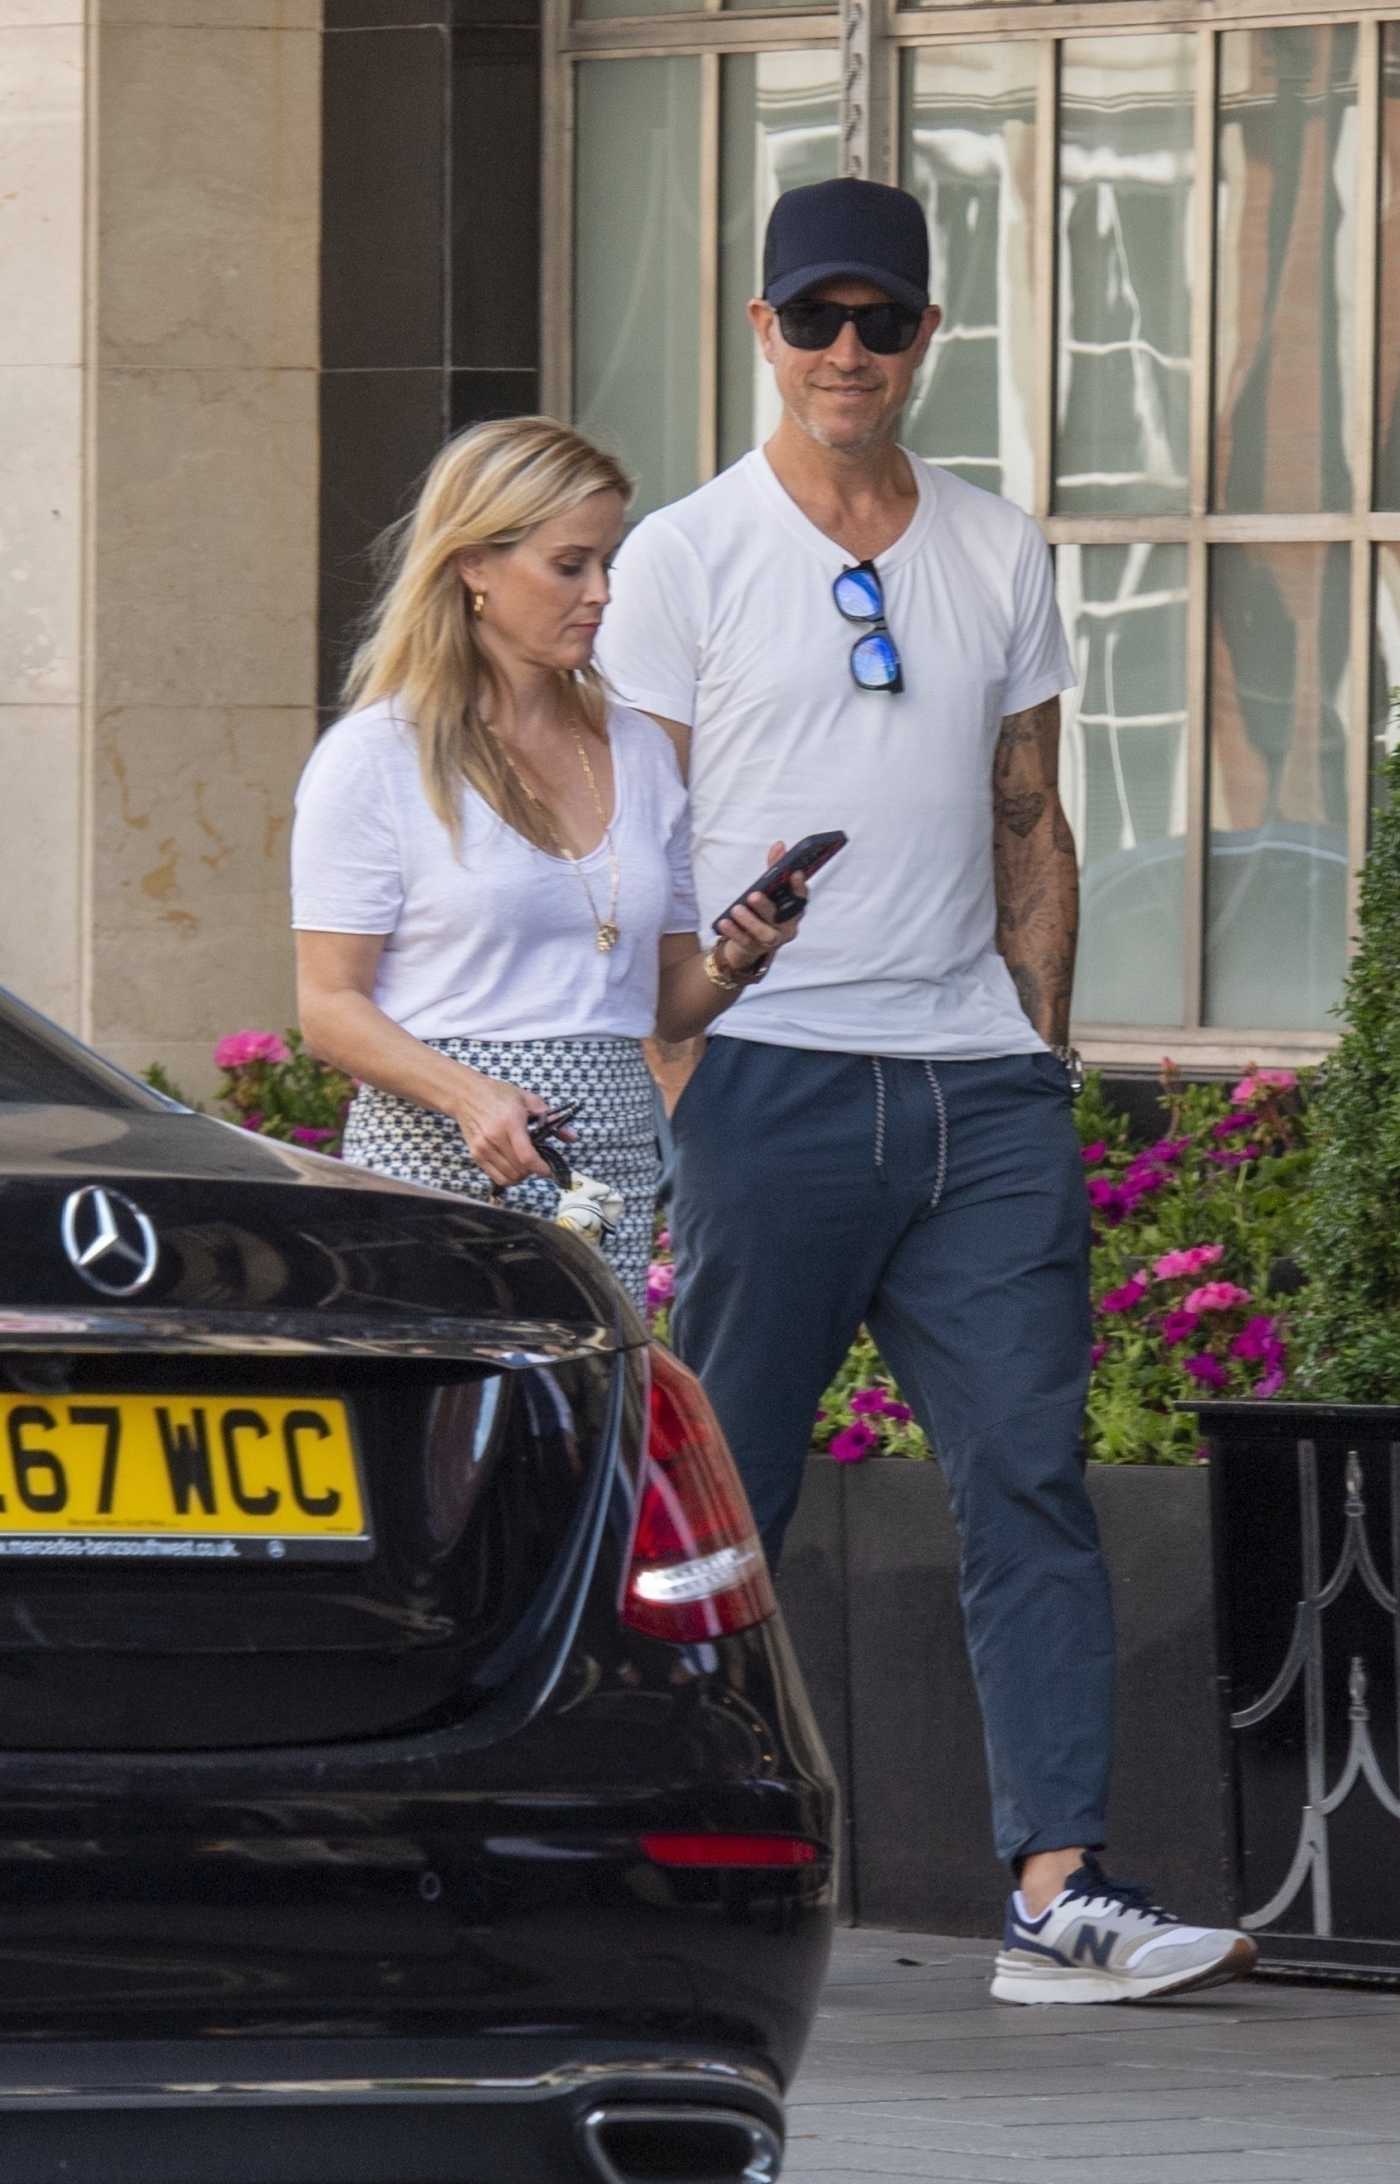 Reese Witherspoon in a White Tee Arrives with Her Husband Jim Toth at Claridge’s Hotel in London 07/13/2022